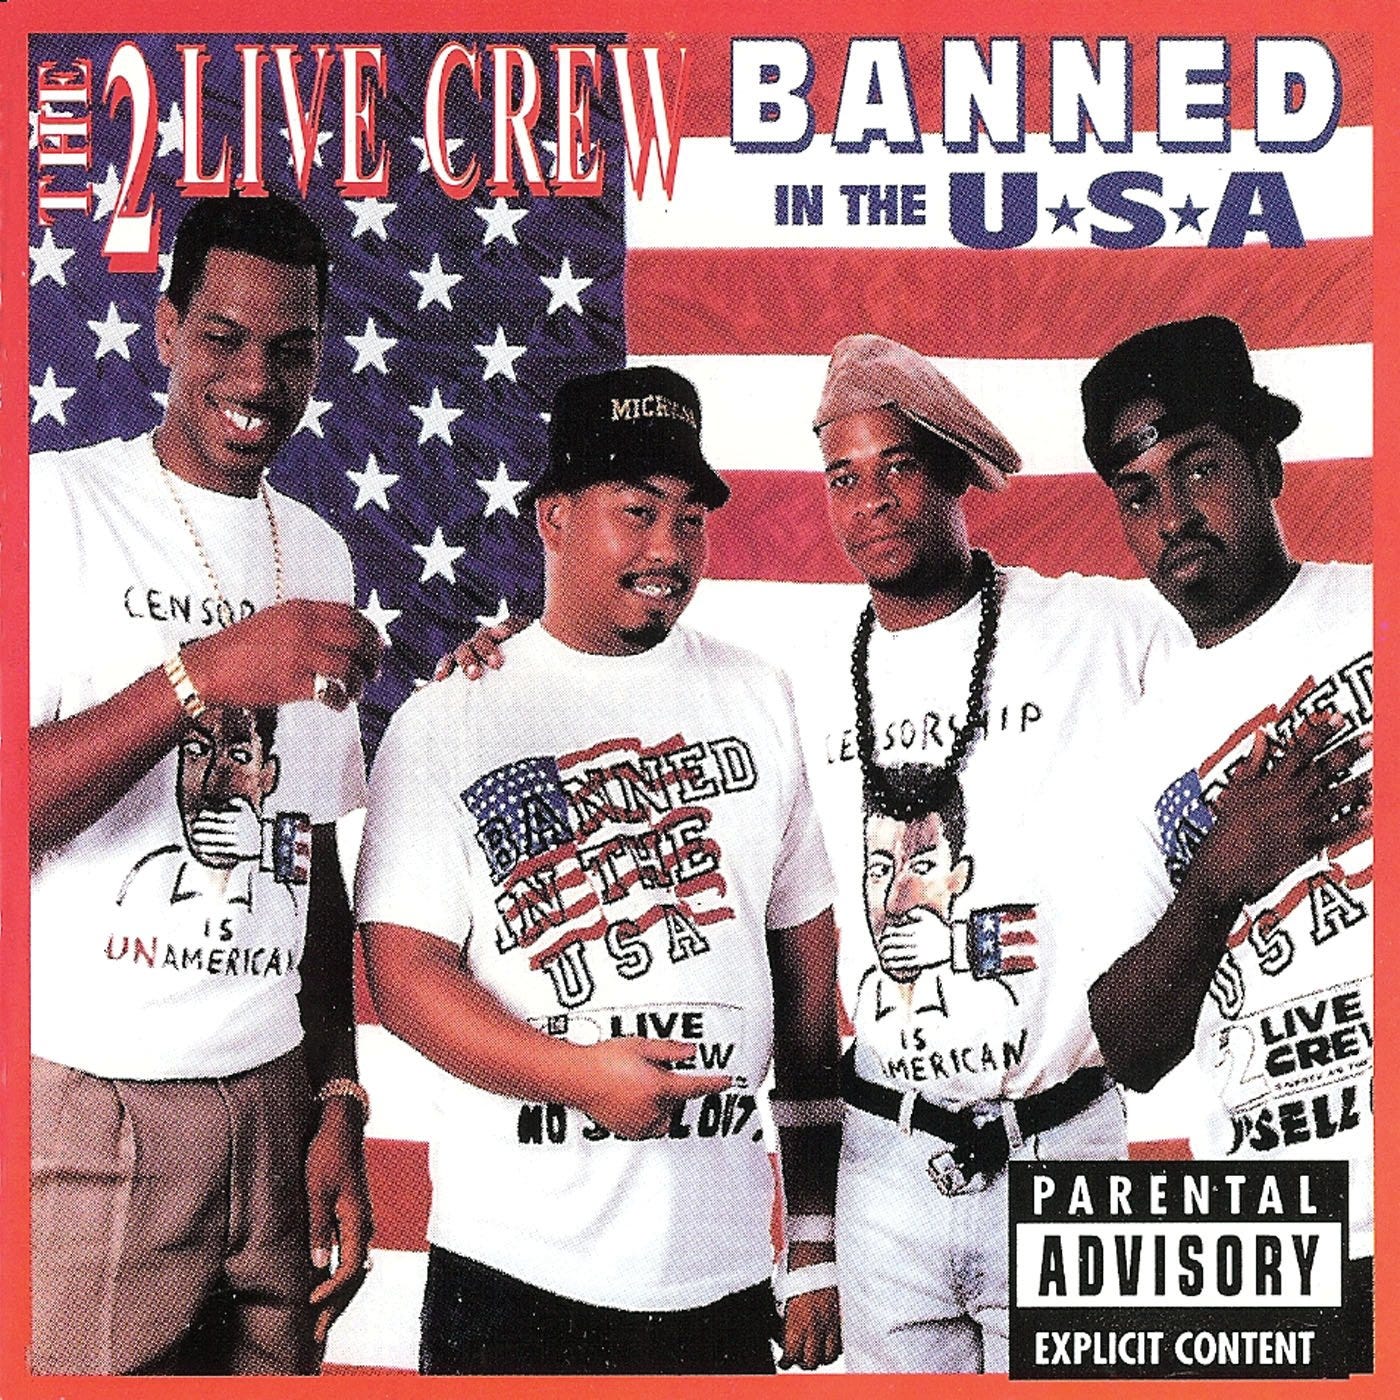 2 LIVE CREW - Banned in the USA - Amazon.com Music